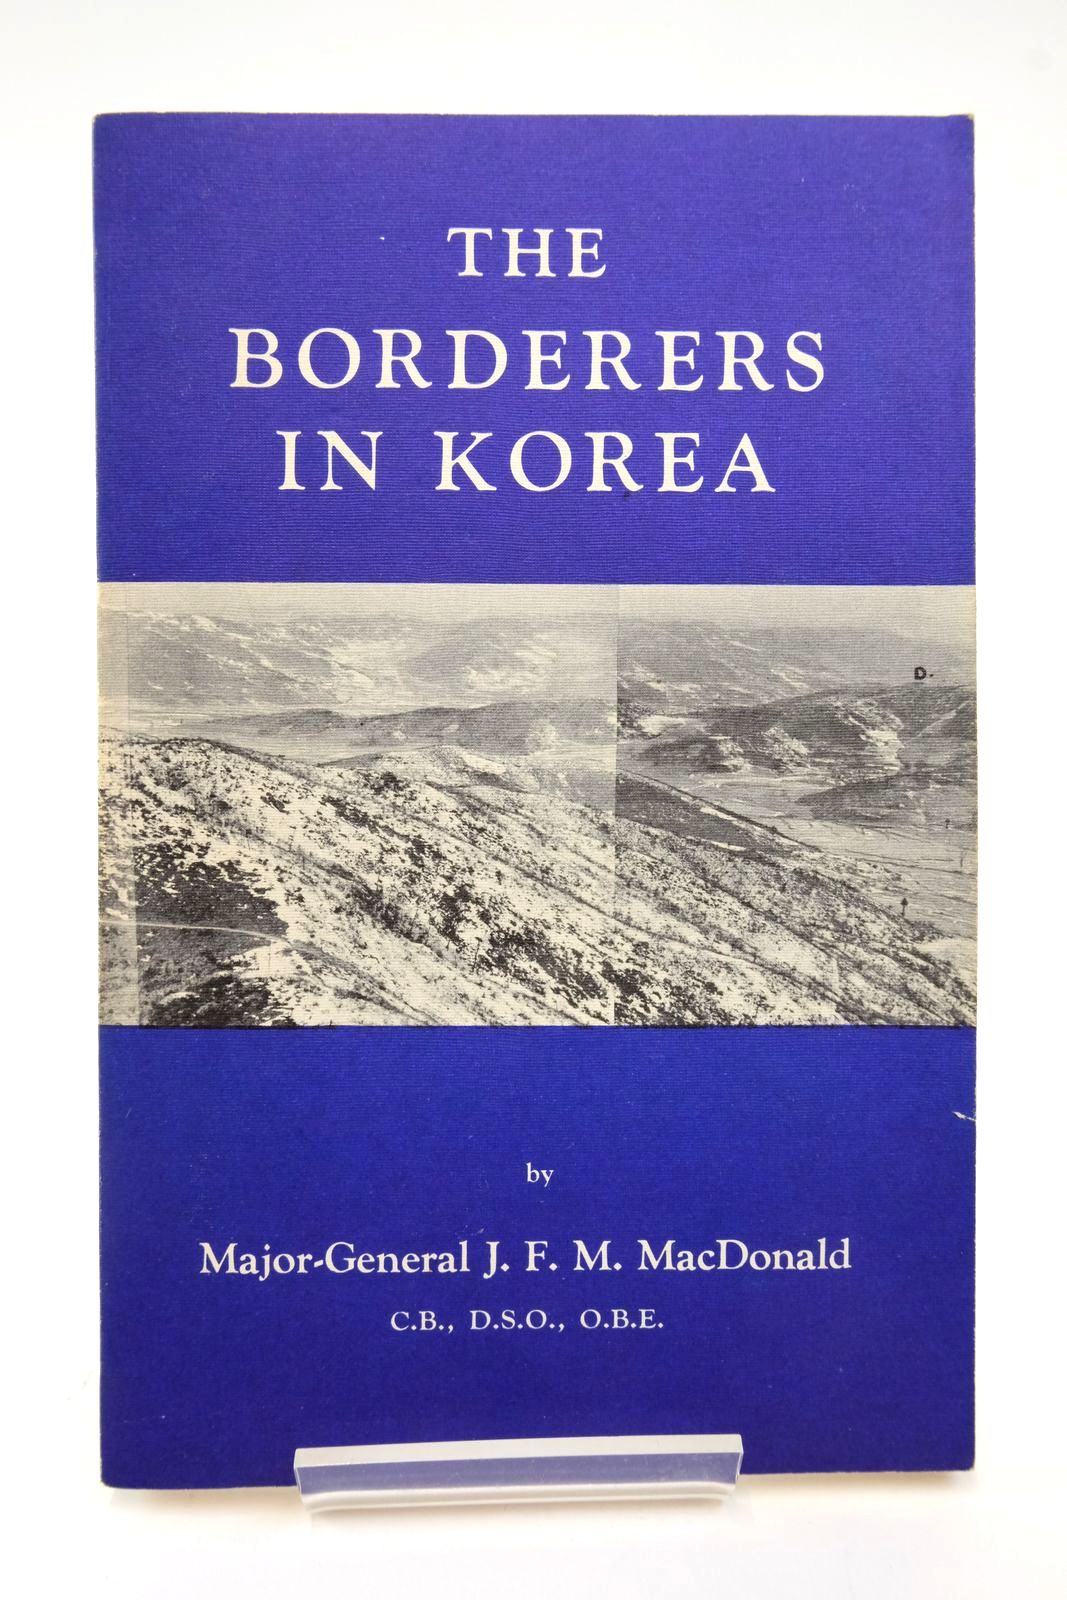 Photo of THE BORDERERS IN KOREA written by Macdonald, J.F.M. published by Martin's Printing Works (STOCK CODE: 2138542)  for sale by Stella & Rose's Books